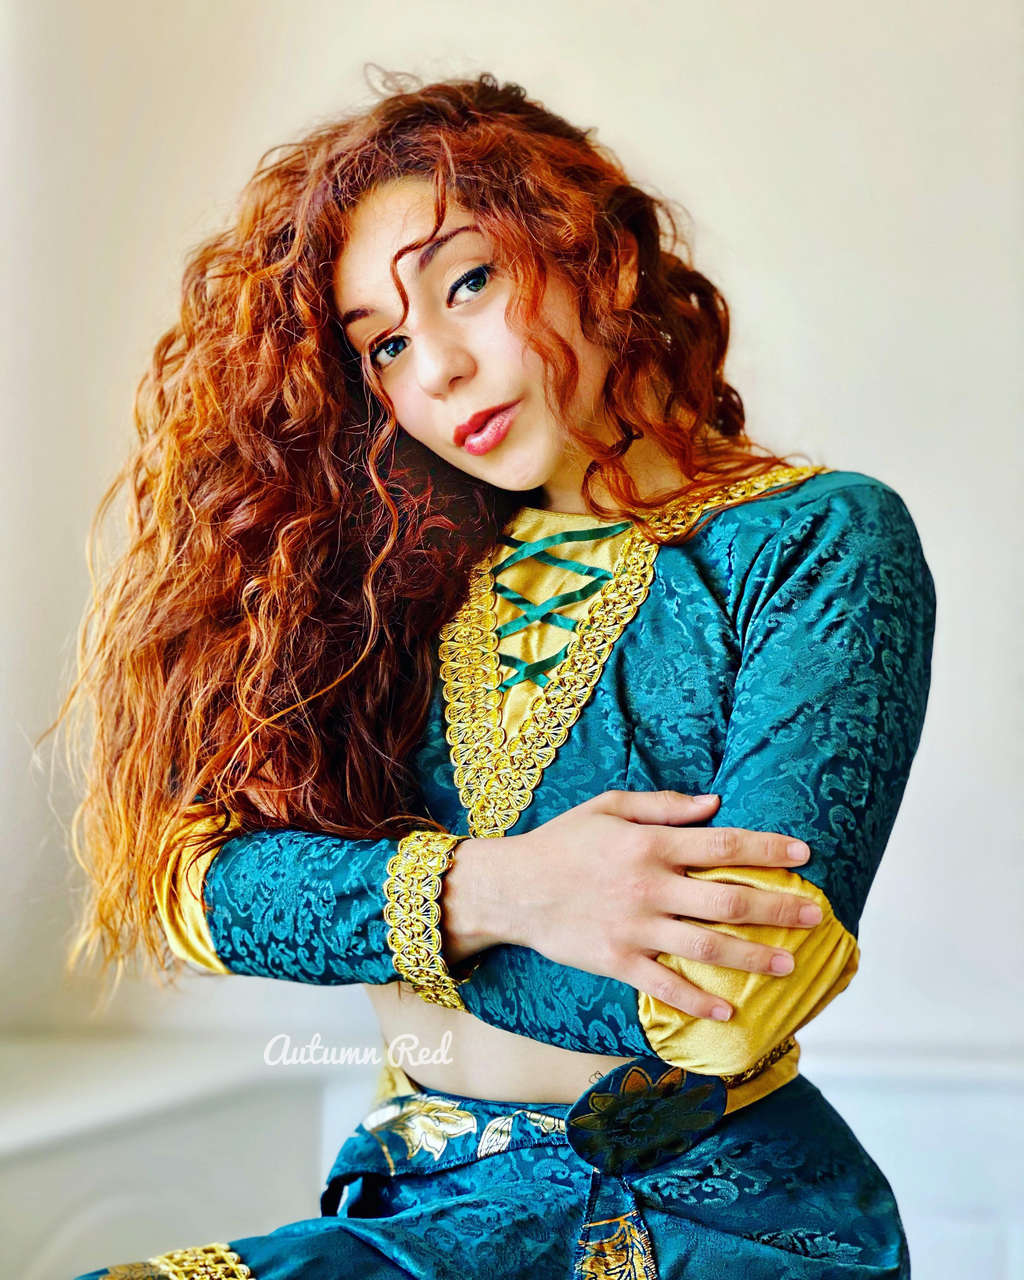 Merida From Brave By Autumn Re